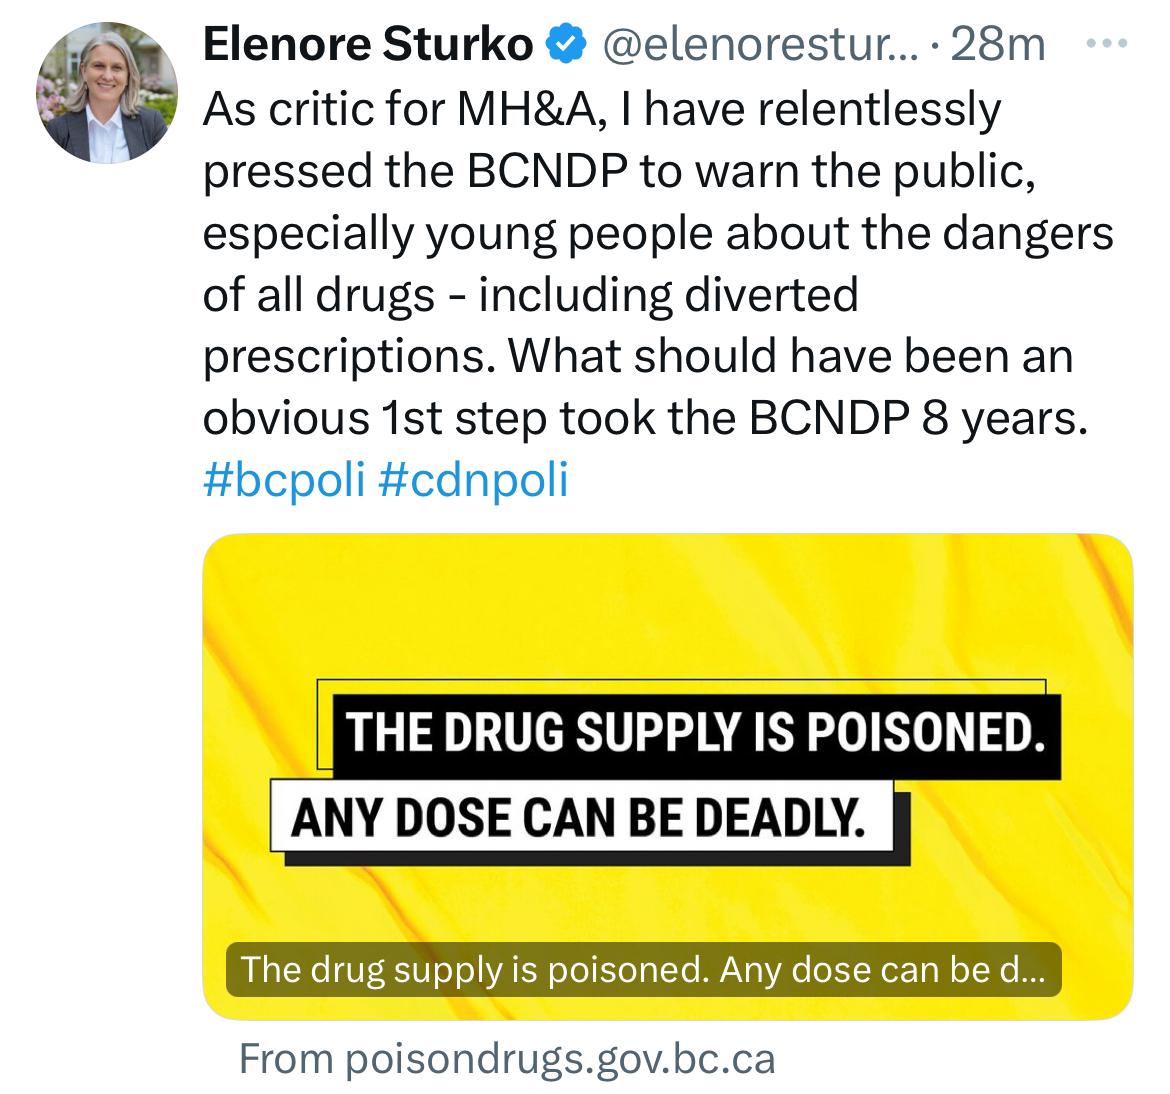 Huh? 🤔 I don’t recall MLA @ElenoreSturko EVER pressing the government to warn people about poisoned drugs, never mind “relentlessly.” As far as I can recall, she has rarely even acknowledged the toxic illicit drug supply. In post after post, media interviews, letters,